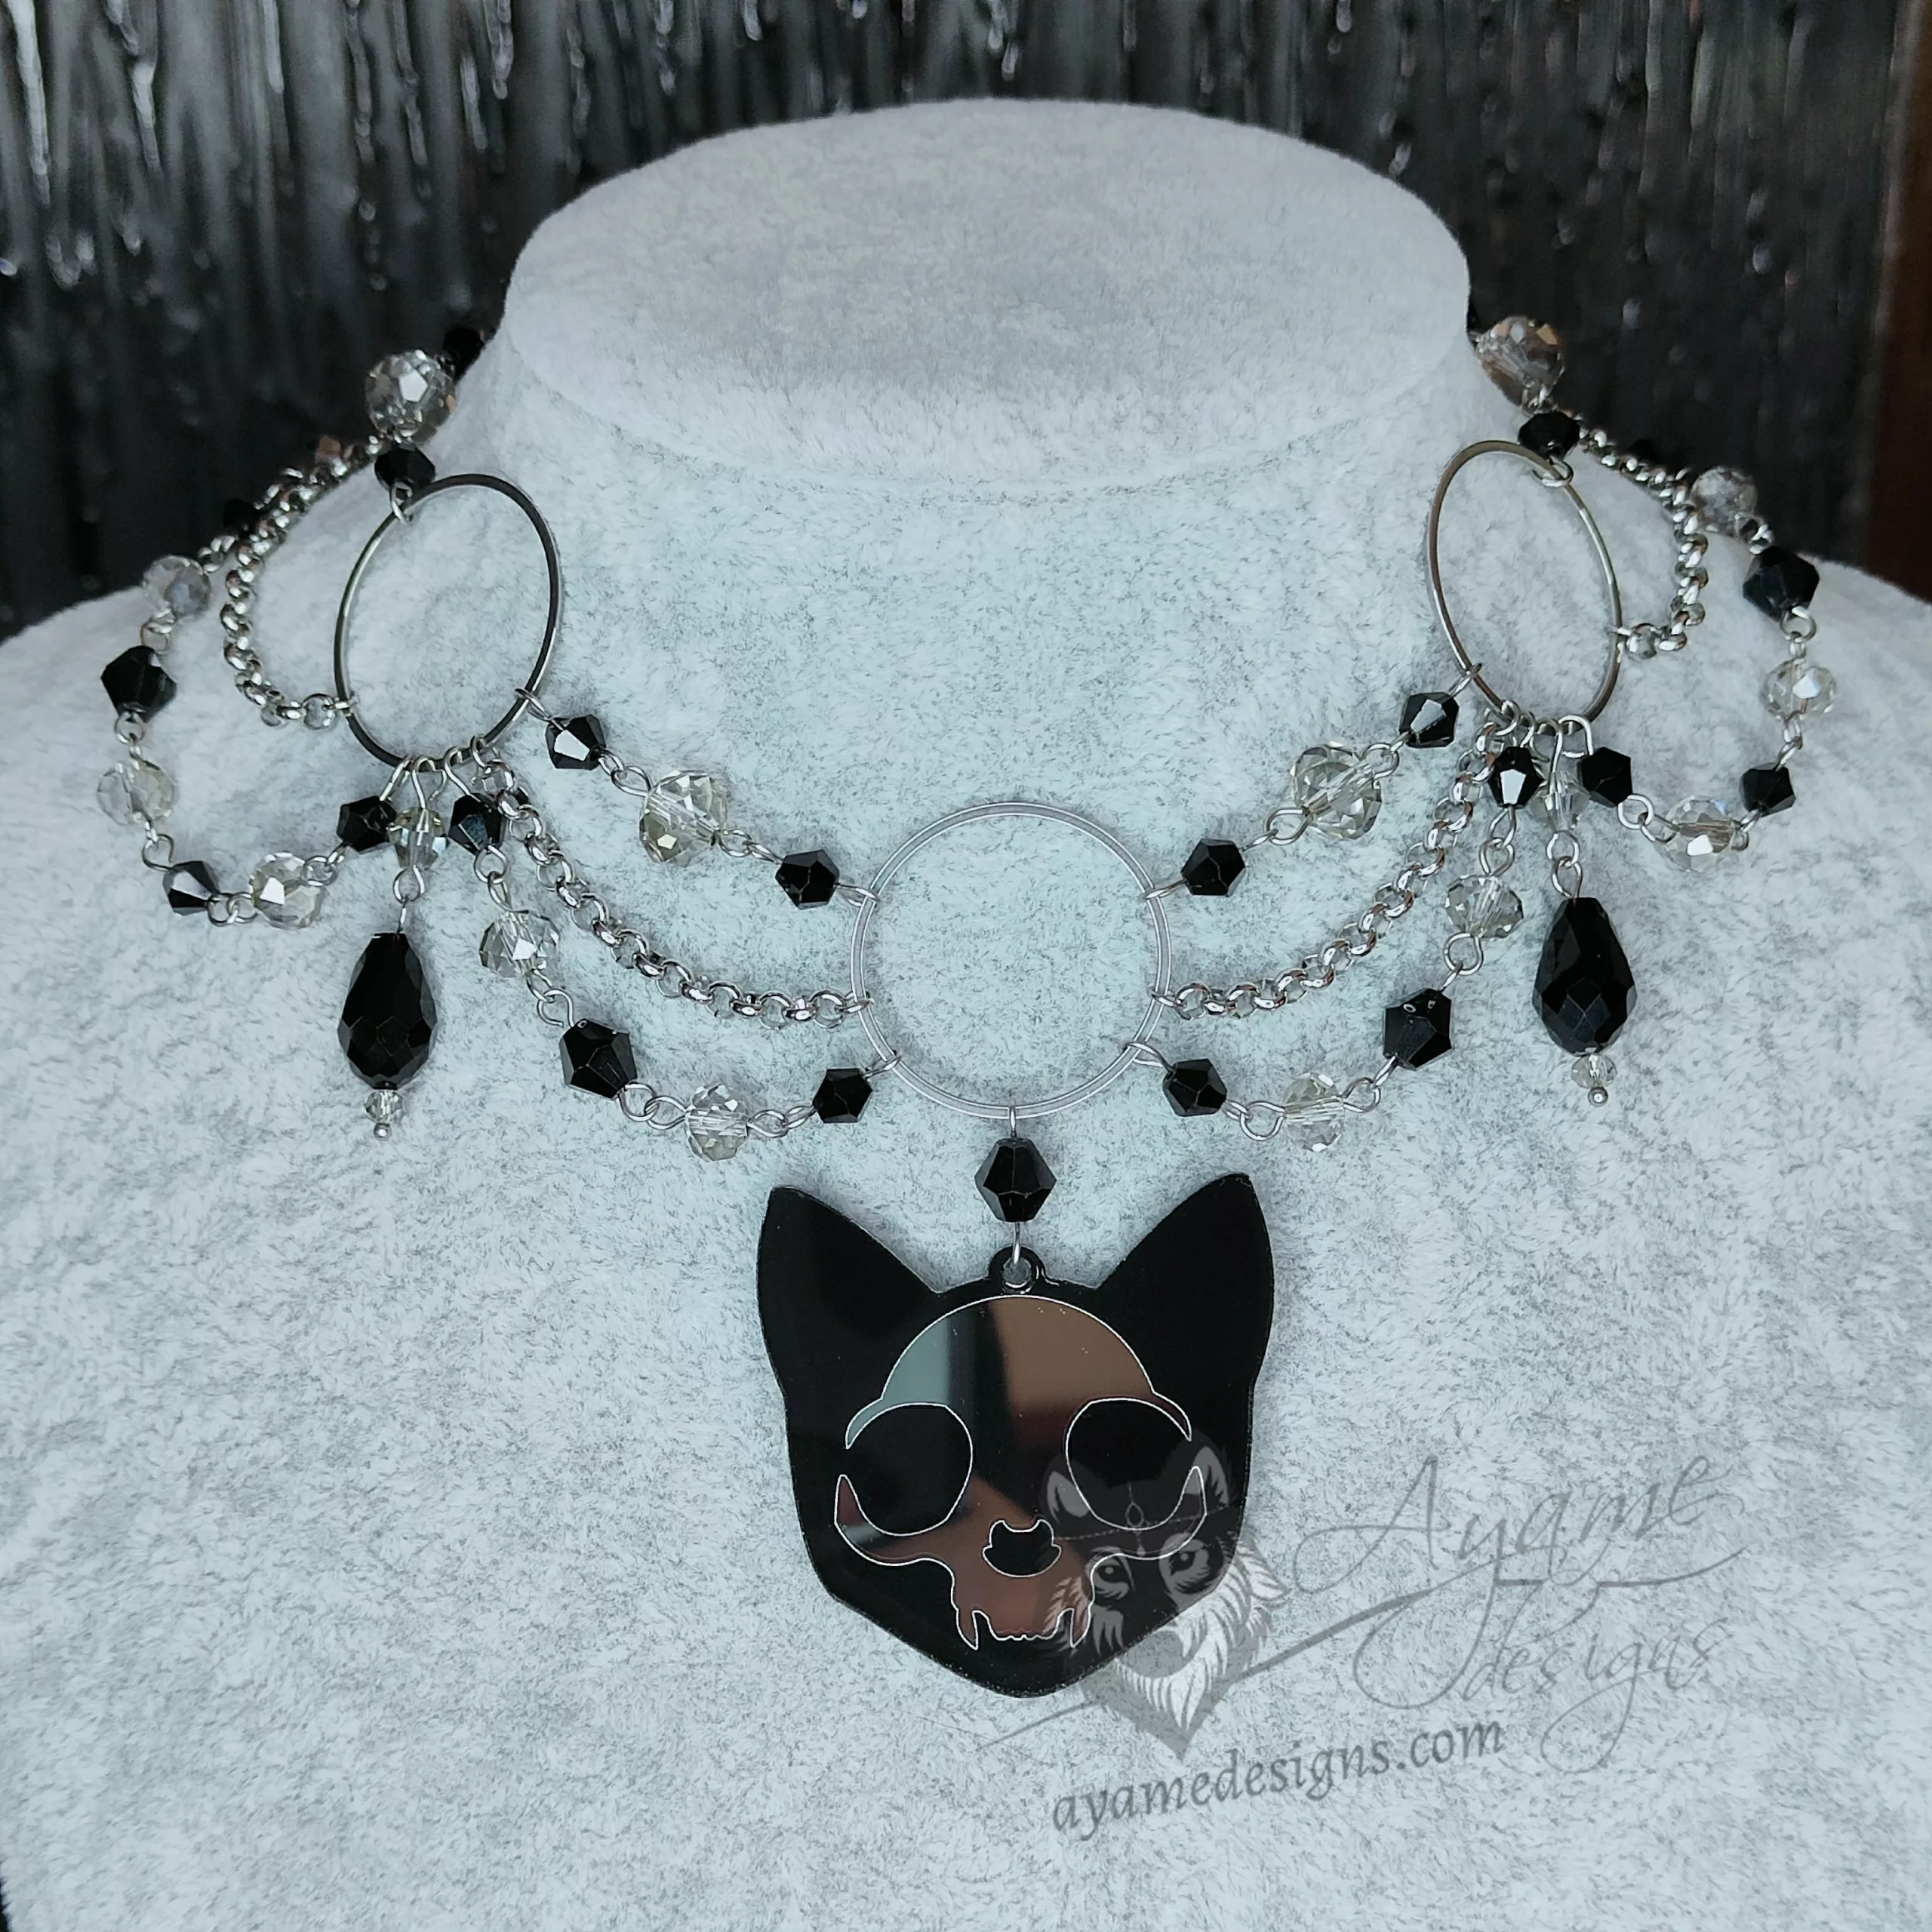 Handmade choker necklace with a large cat skull pendant, large rings, black and grey crystal beads and stainless steel chain